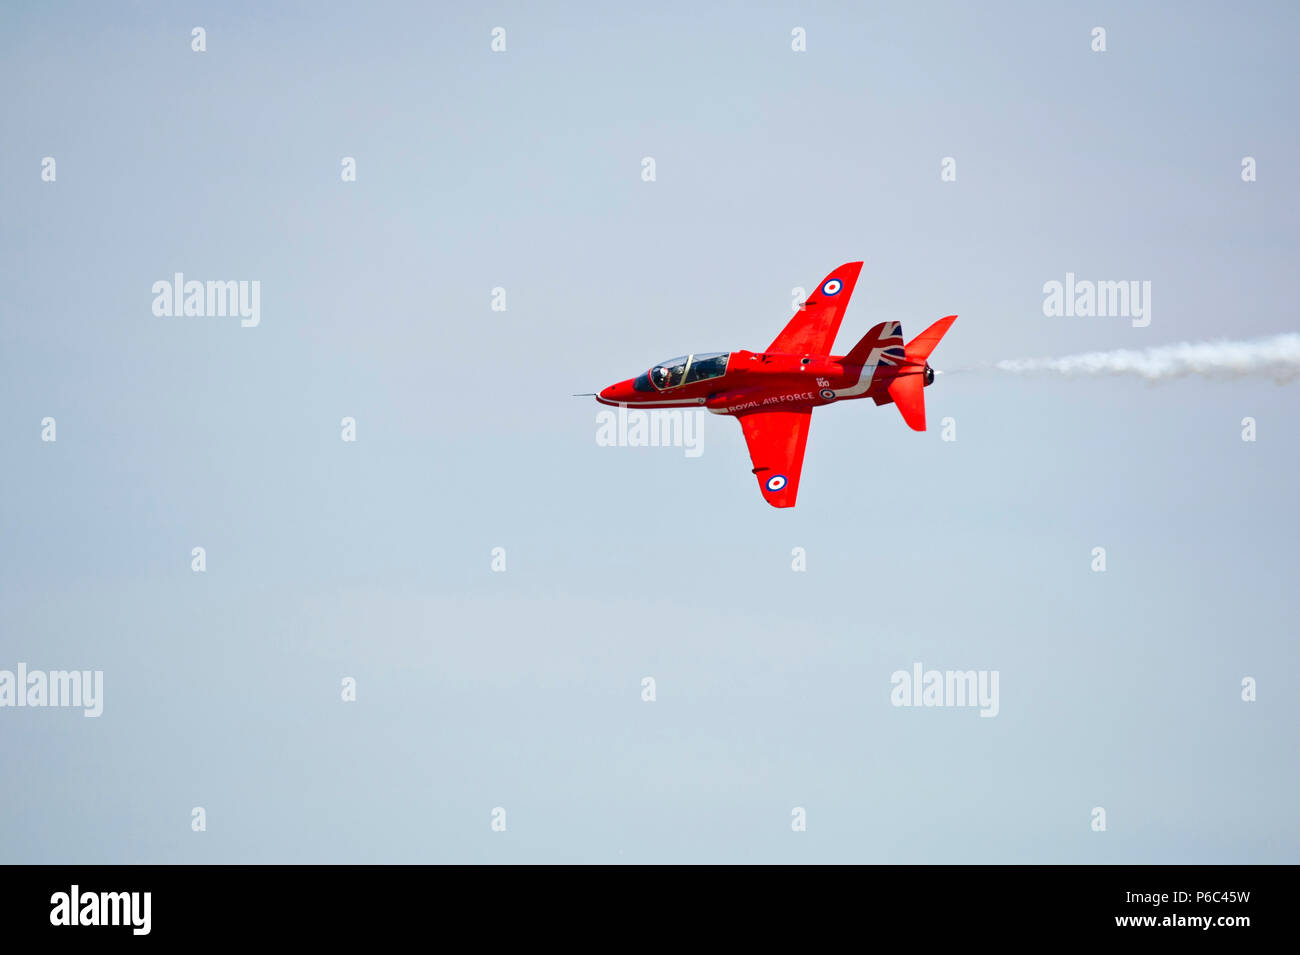 The Red Arrows in RAF 100th Anniversary livery, Weston Air Festival 2018 Stock Photo